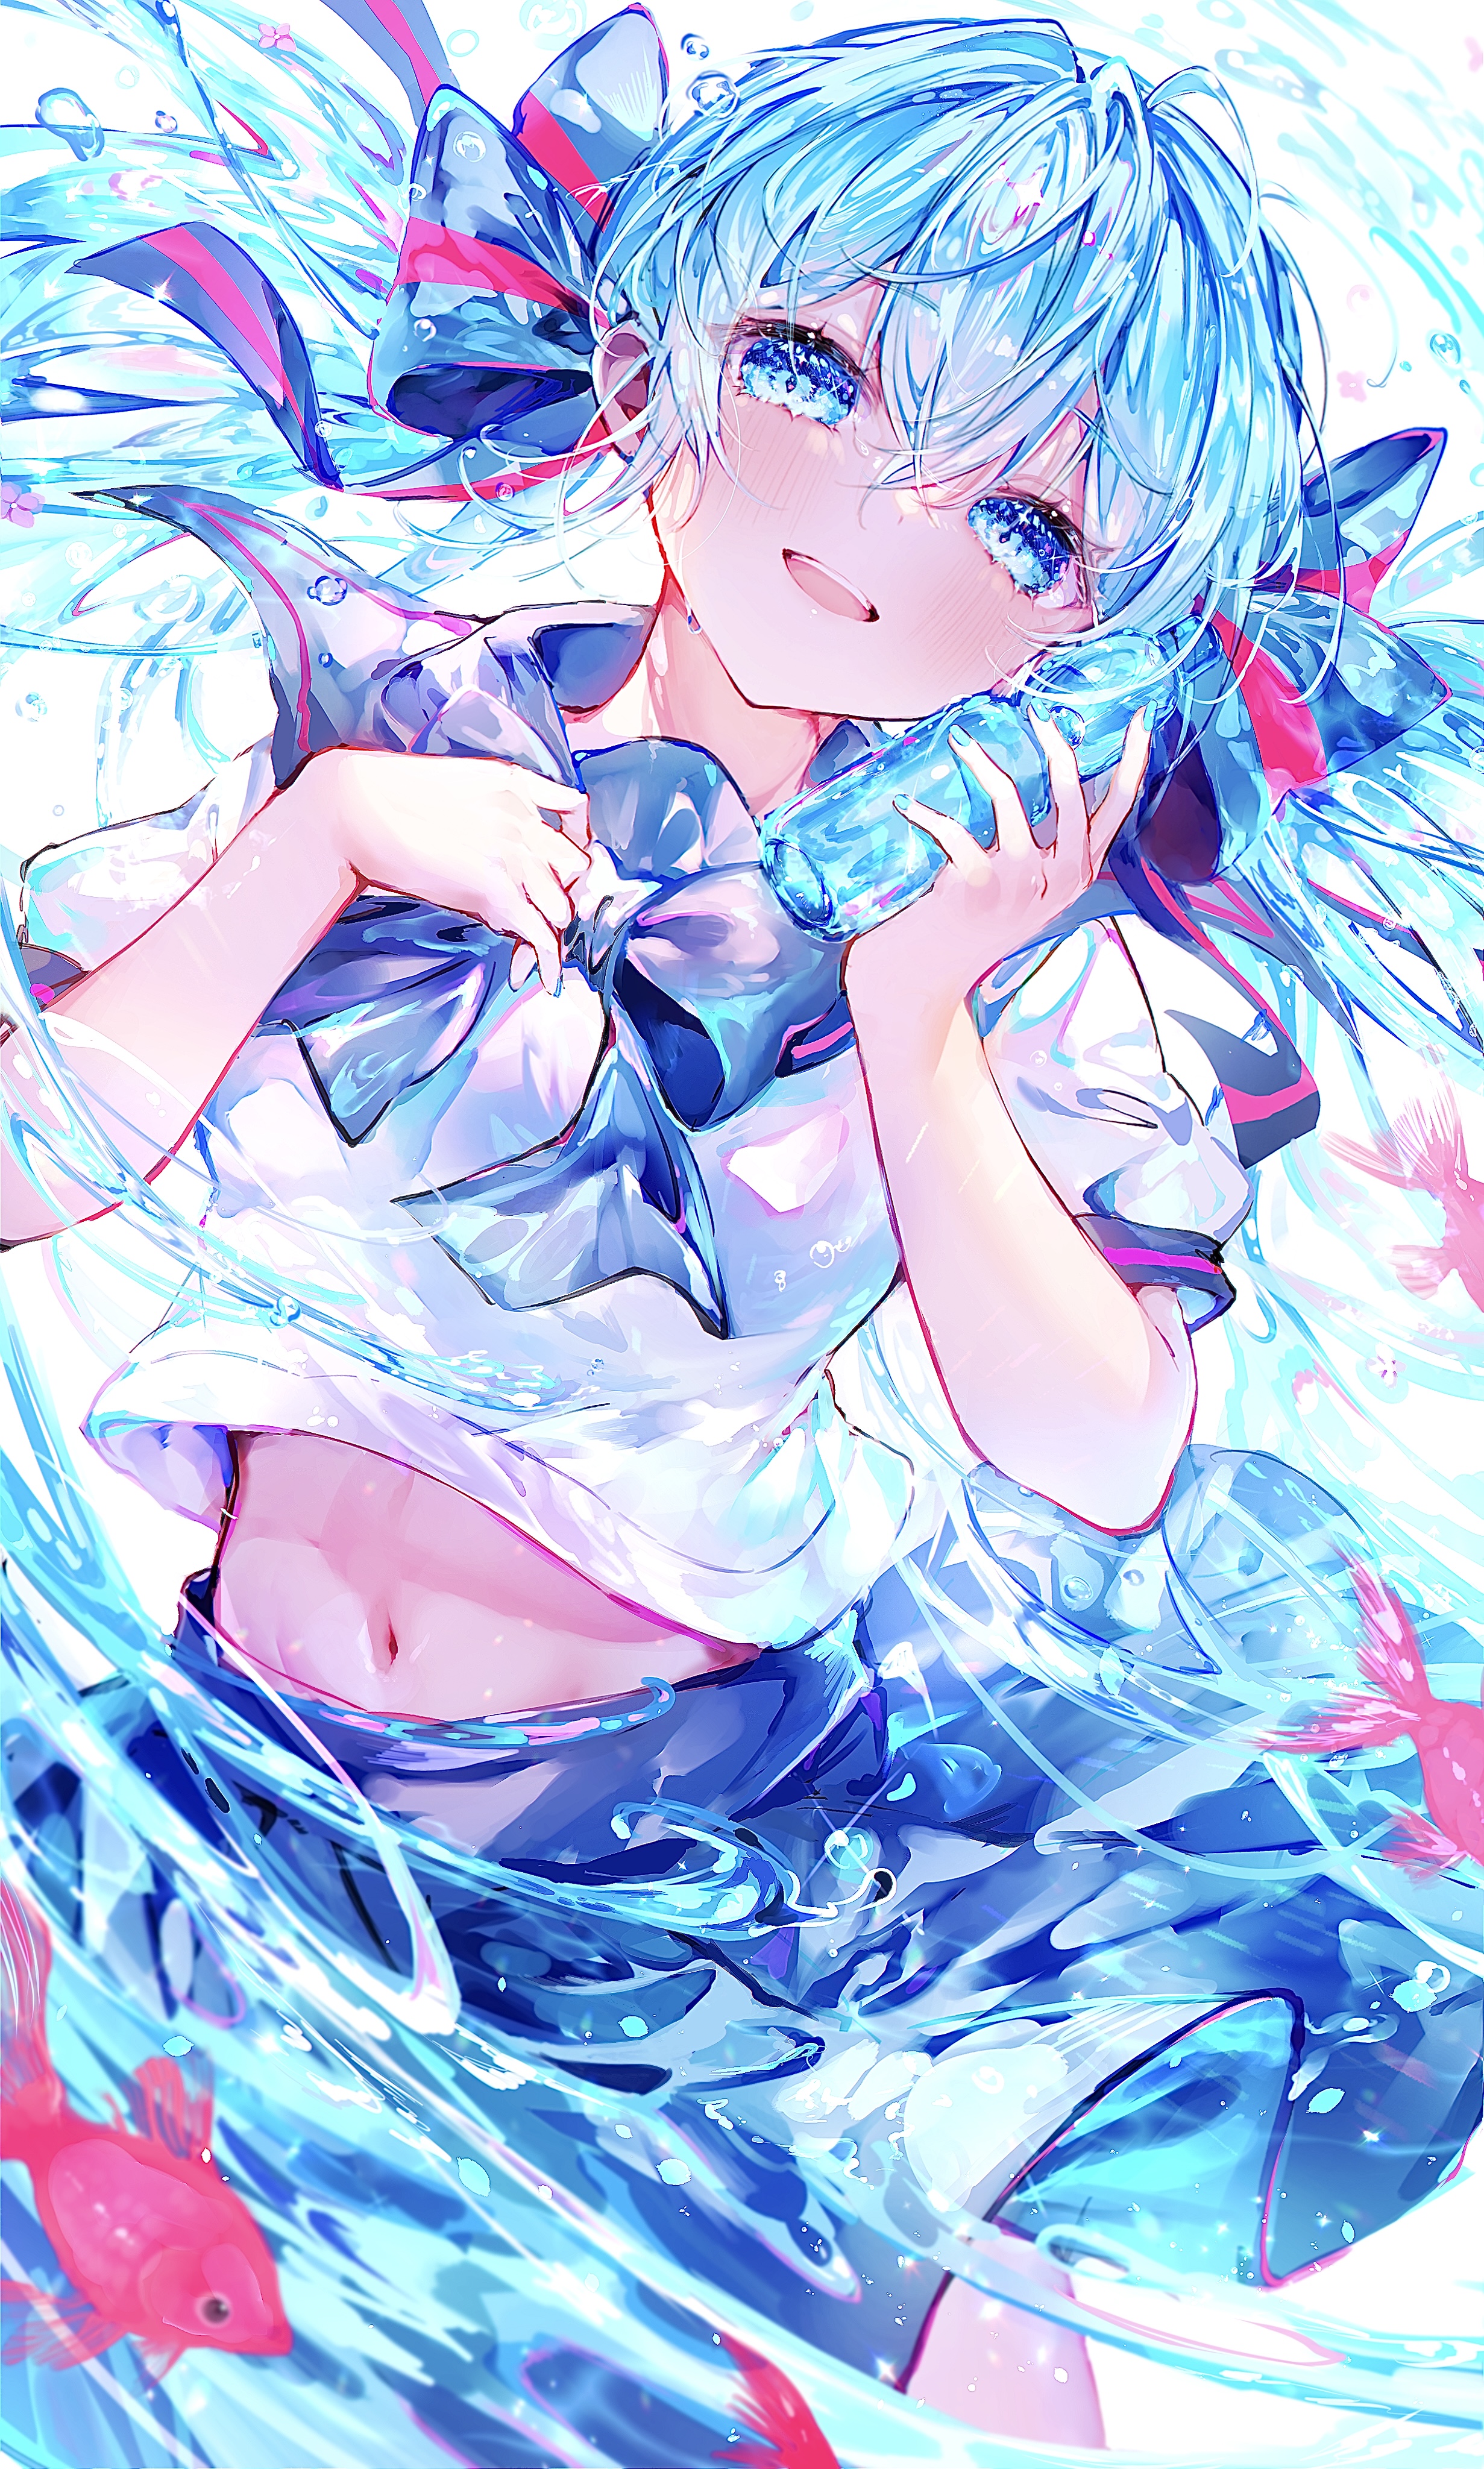 Anime 2462x4096 anime anime girls Pixiv colorful Vocaloid Hatsune Miku blue hair blue eyes smiling fish animals looking at viewer long hair twintails portrait display schoolgirl school uniform bow tie blushing belly button water water drops